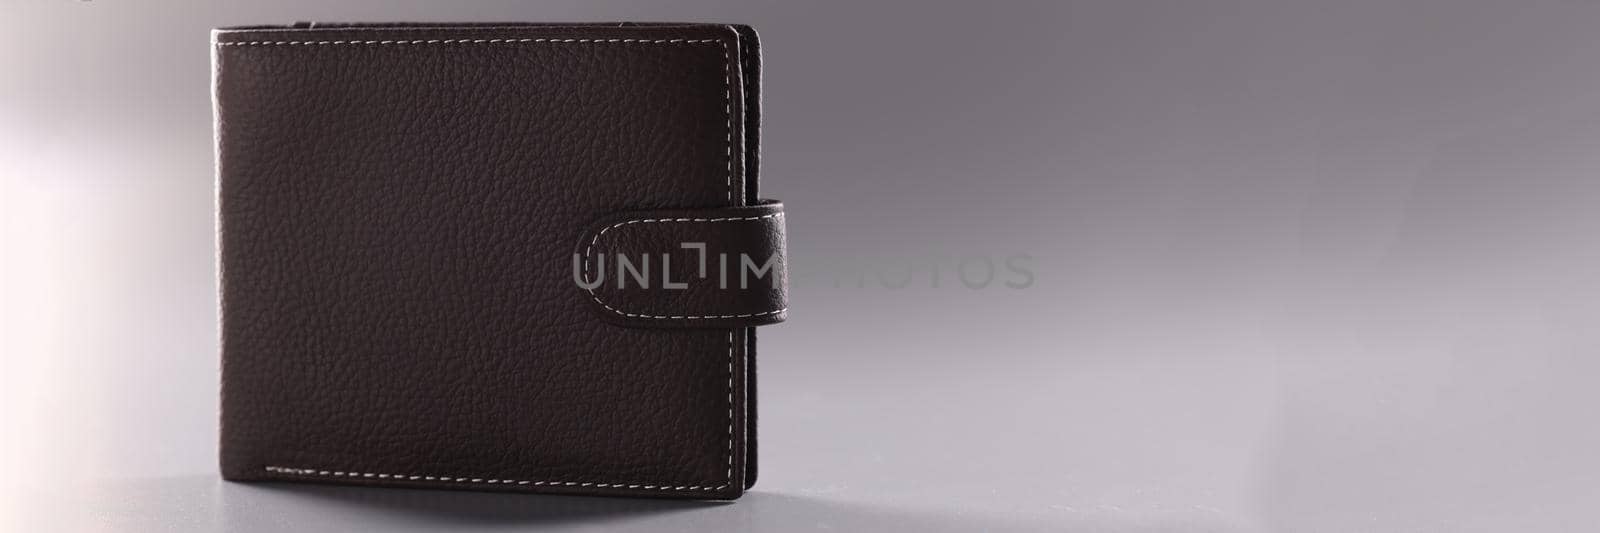 Brown leather closed wallet on gray background by kuprevich